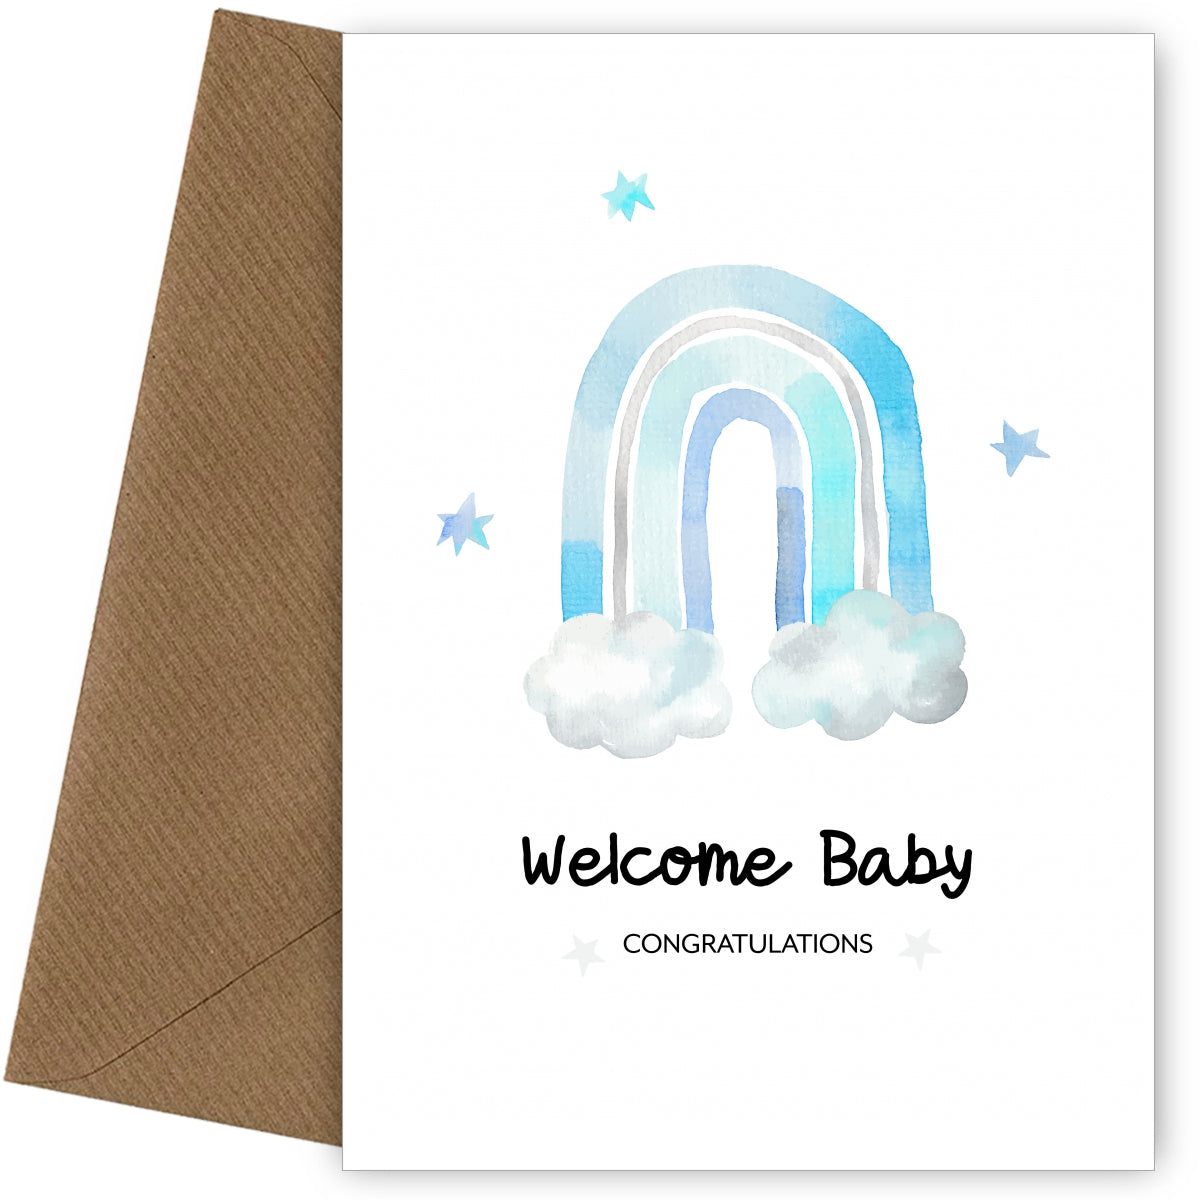 Congratulations New Baby Boy Card for Proud Parents or Grandparents - Blue Rainbow